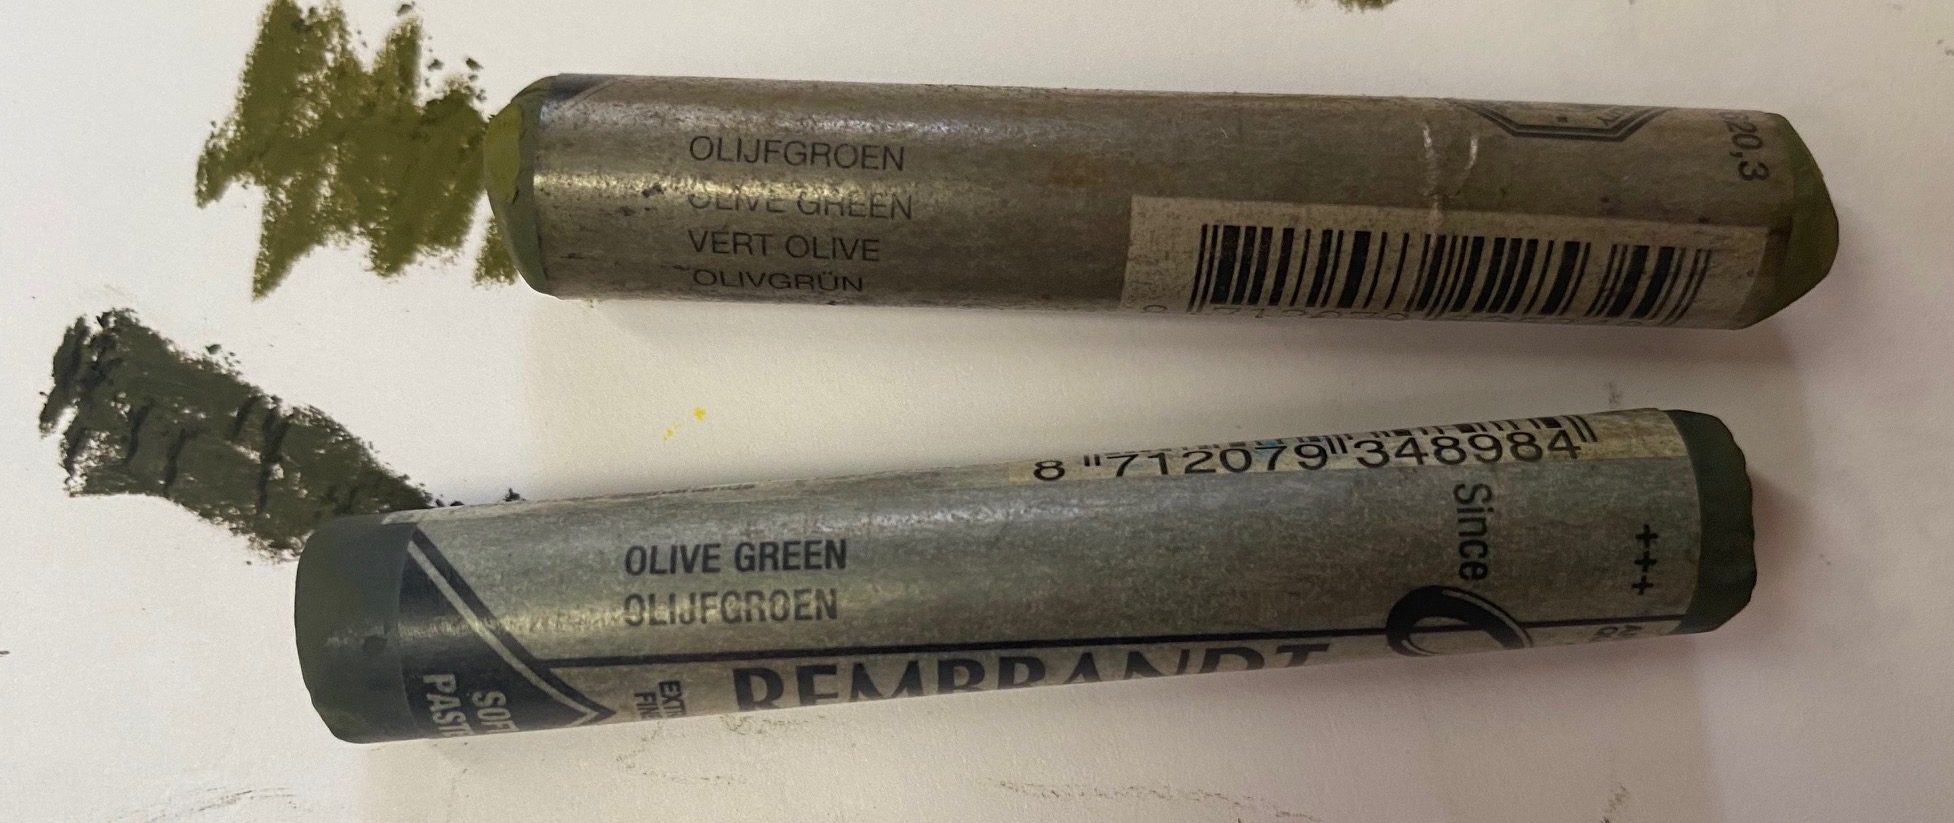 Sally Strand's fav pastels - Rembrandt Olive Green 620.3 (top) and 620.2 (bottom)